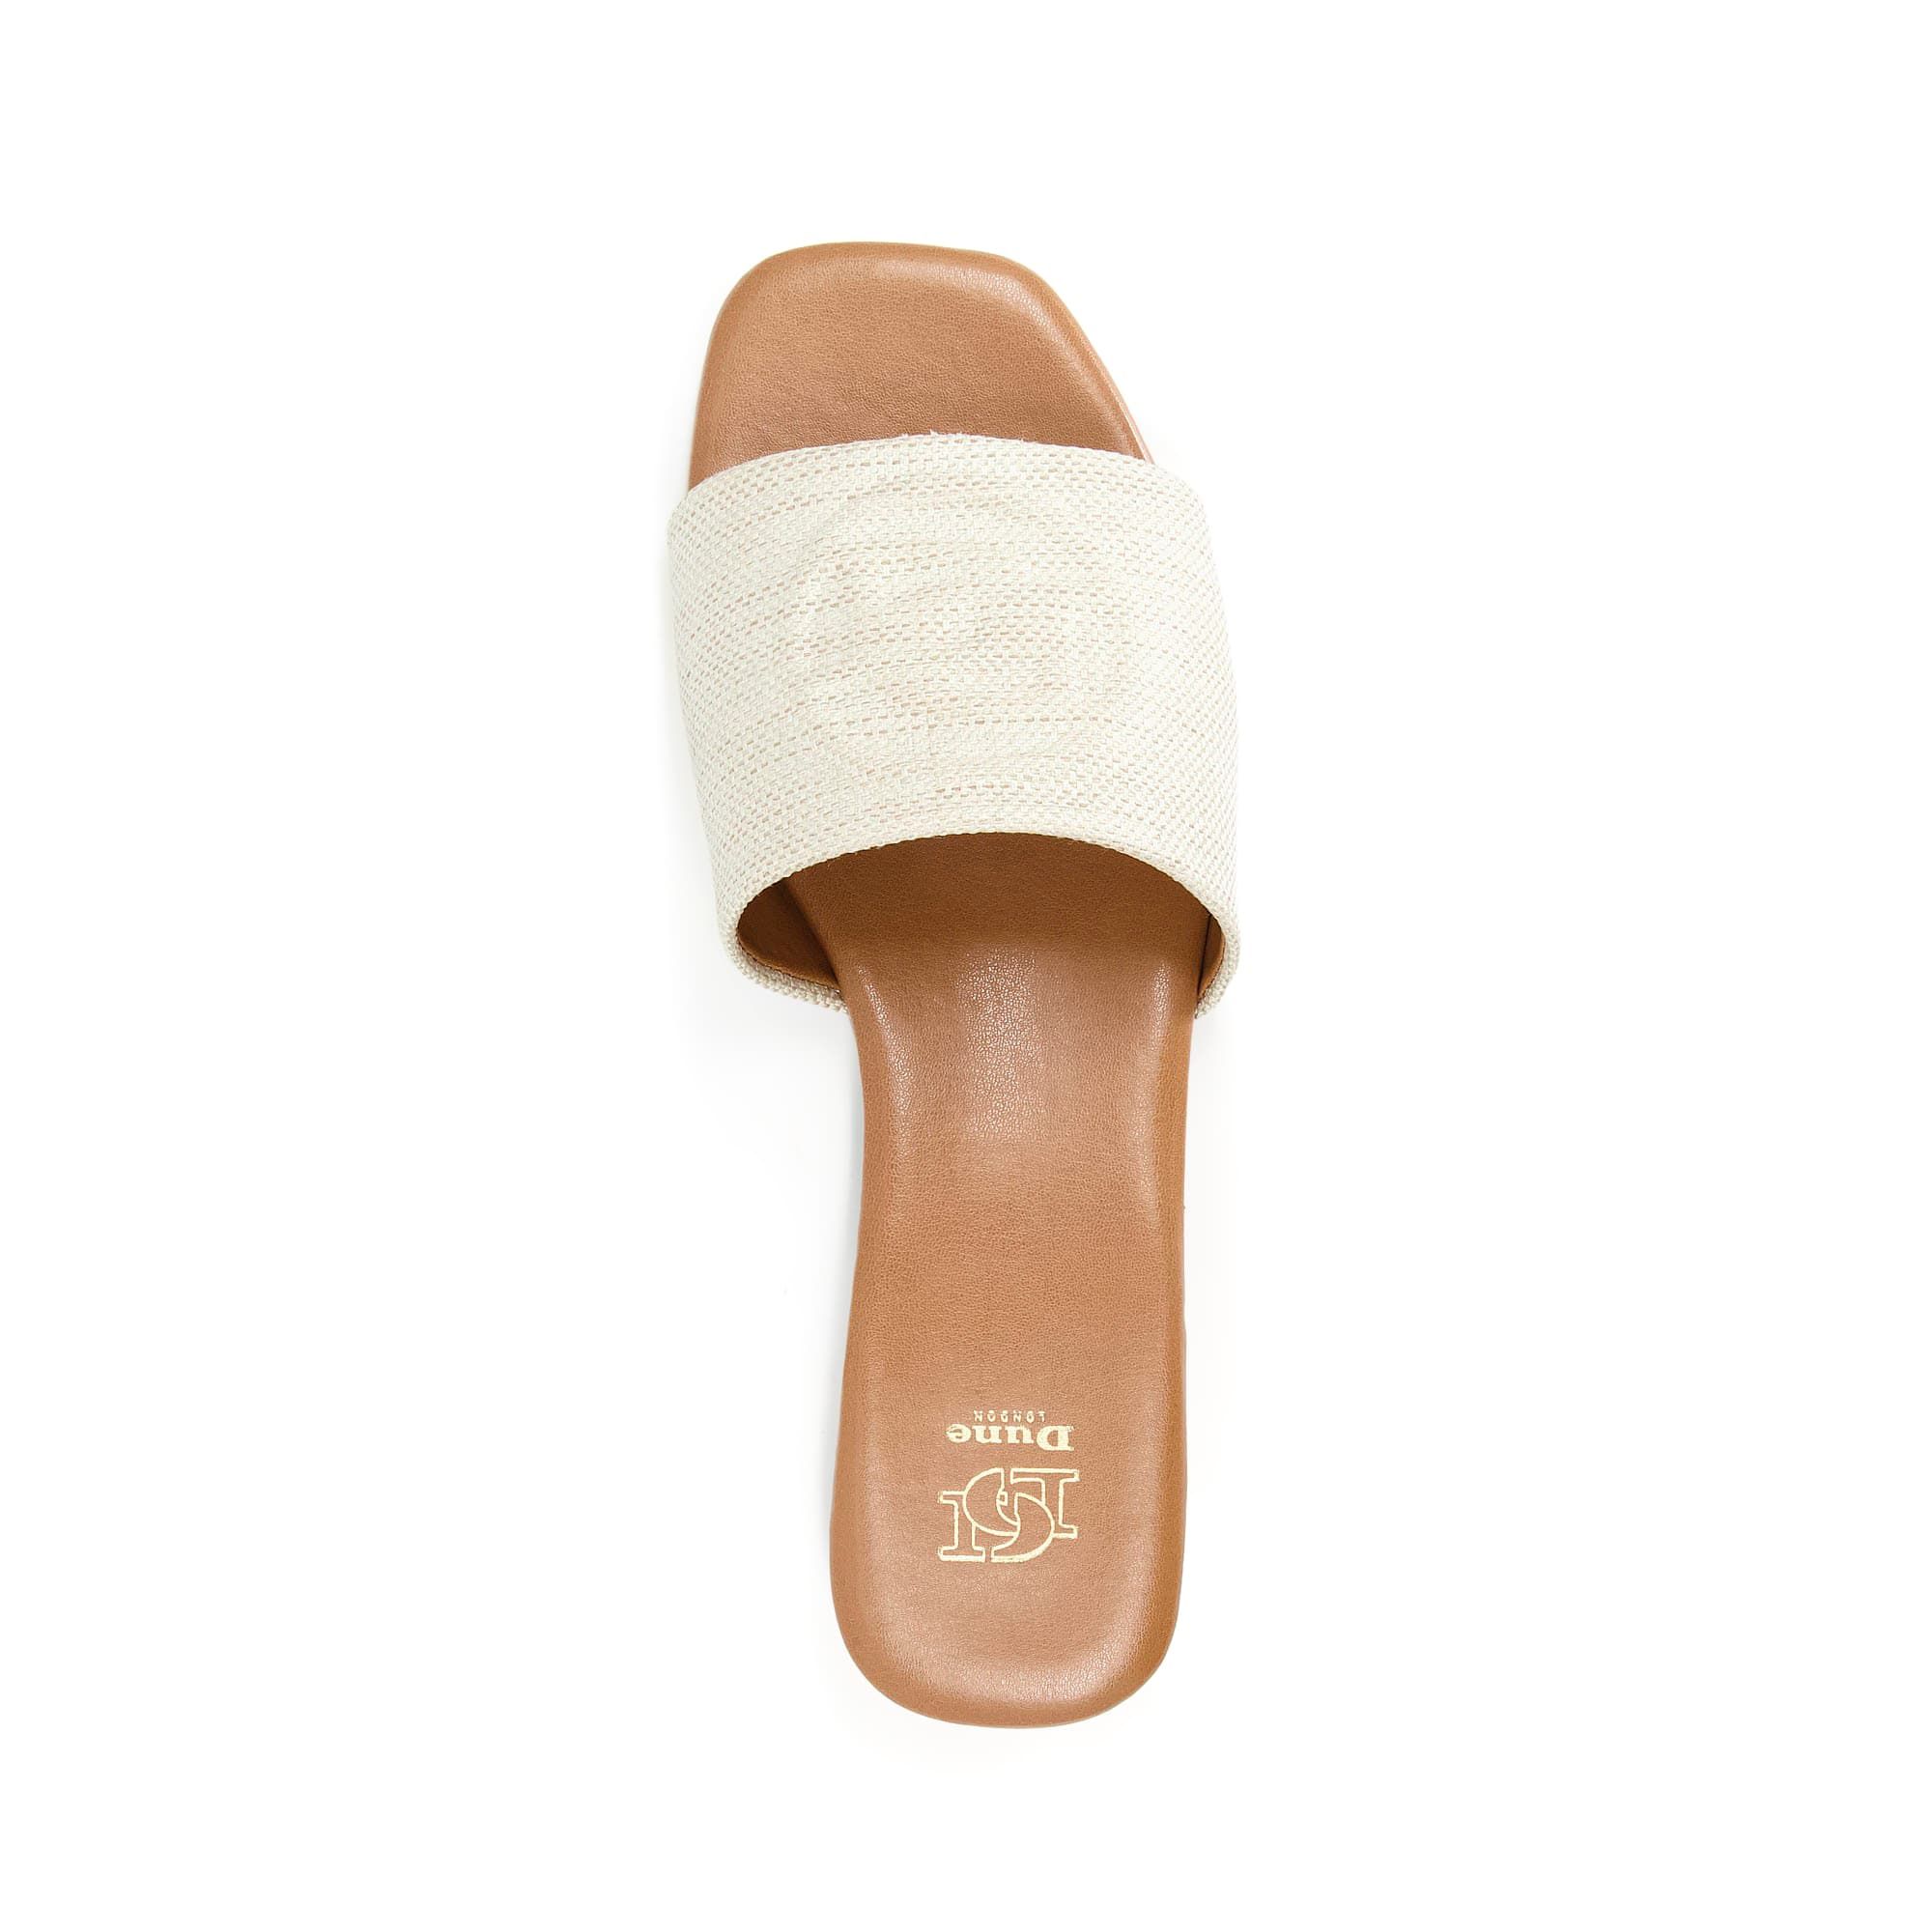 These stylish sliders mean business, with a monogram-embossed strap, an open-square toe and a neutral colour palette. Designed to be worn with anything and everything this summer.